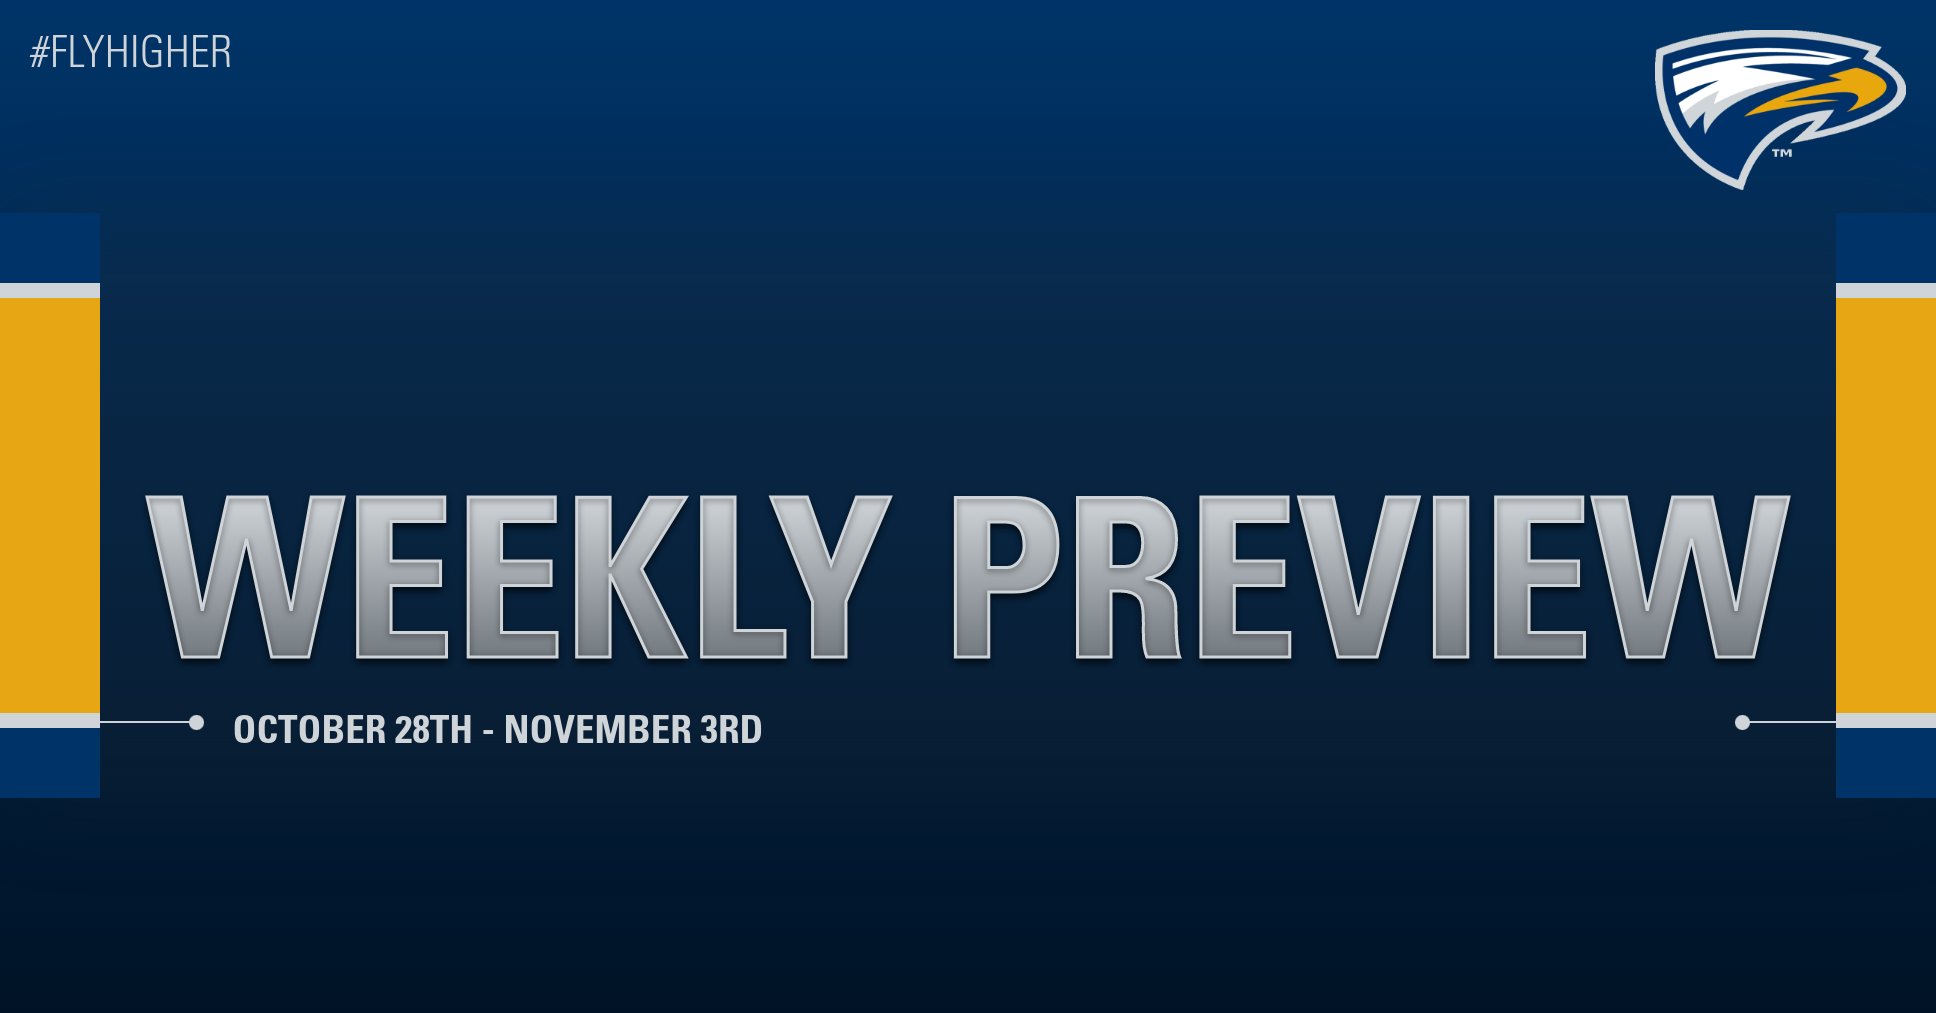 Emory Athletics Weekly Preview - October 28th - November 3rd